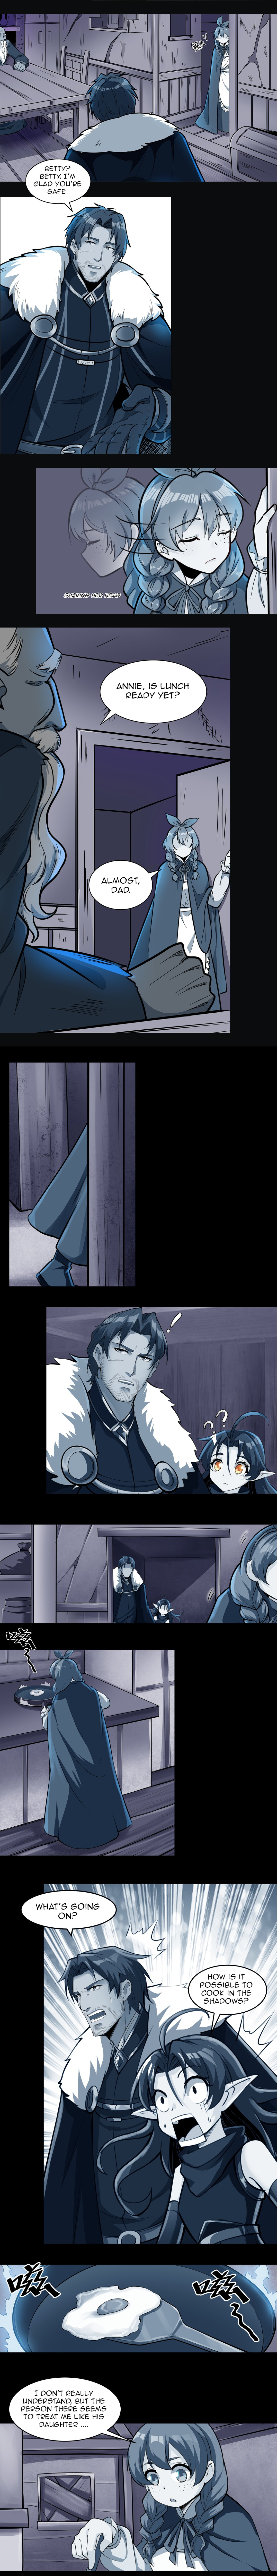 The Sword Of Dawn - Page 3